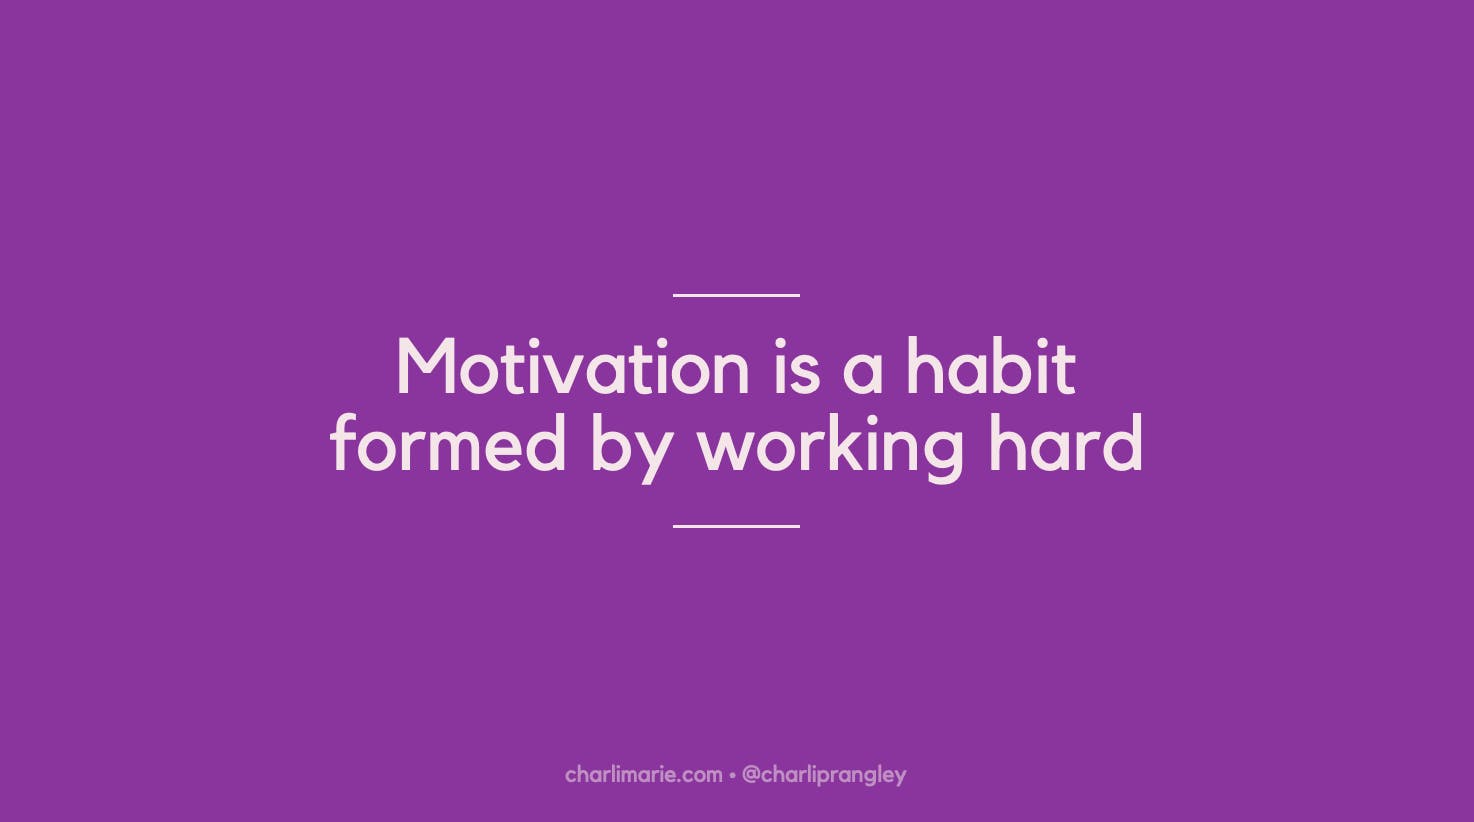 Slide says "Motivation is a habit formed by working hard"